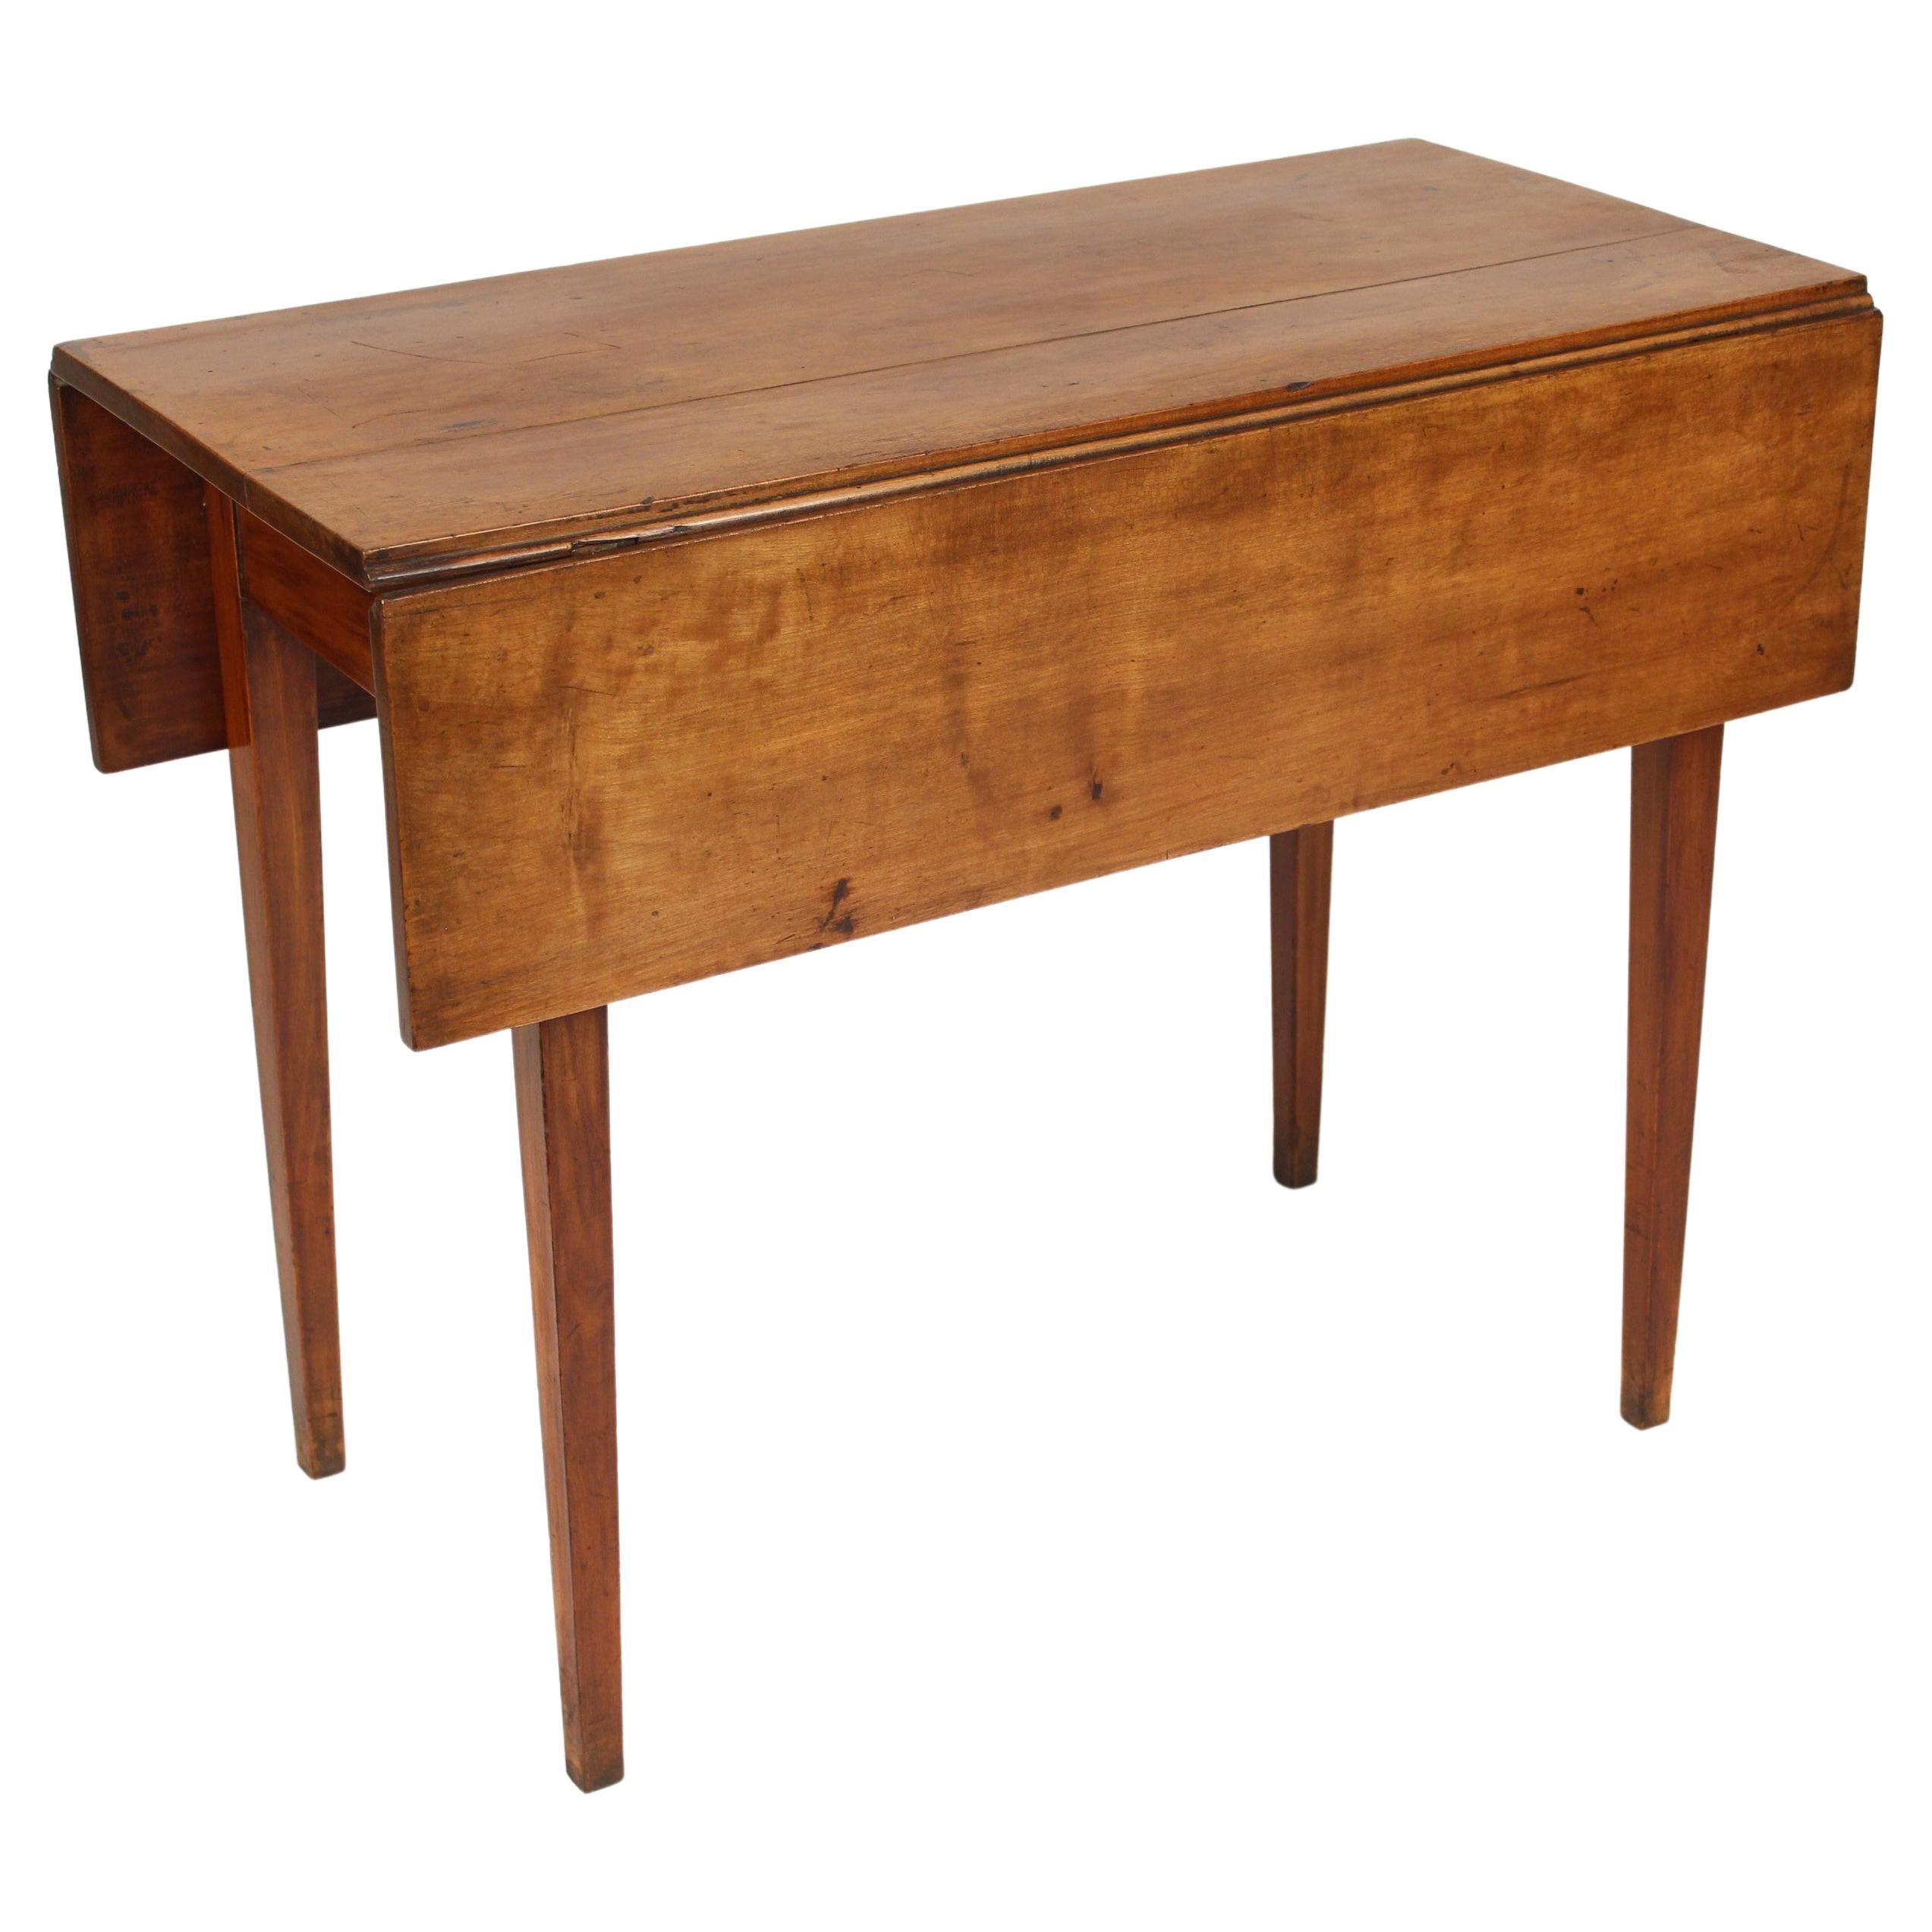 Neo Classical Fruit Wood Drop Leaf Table